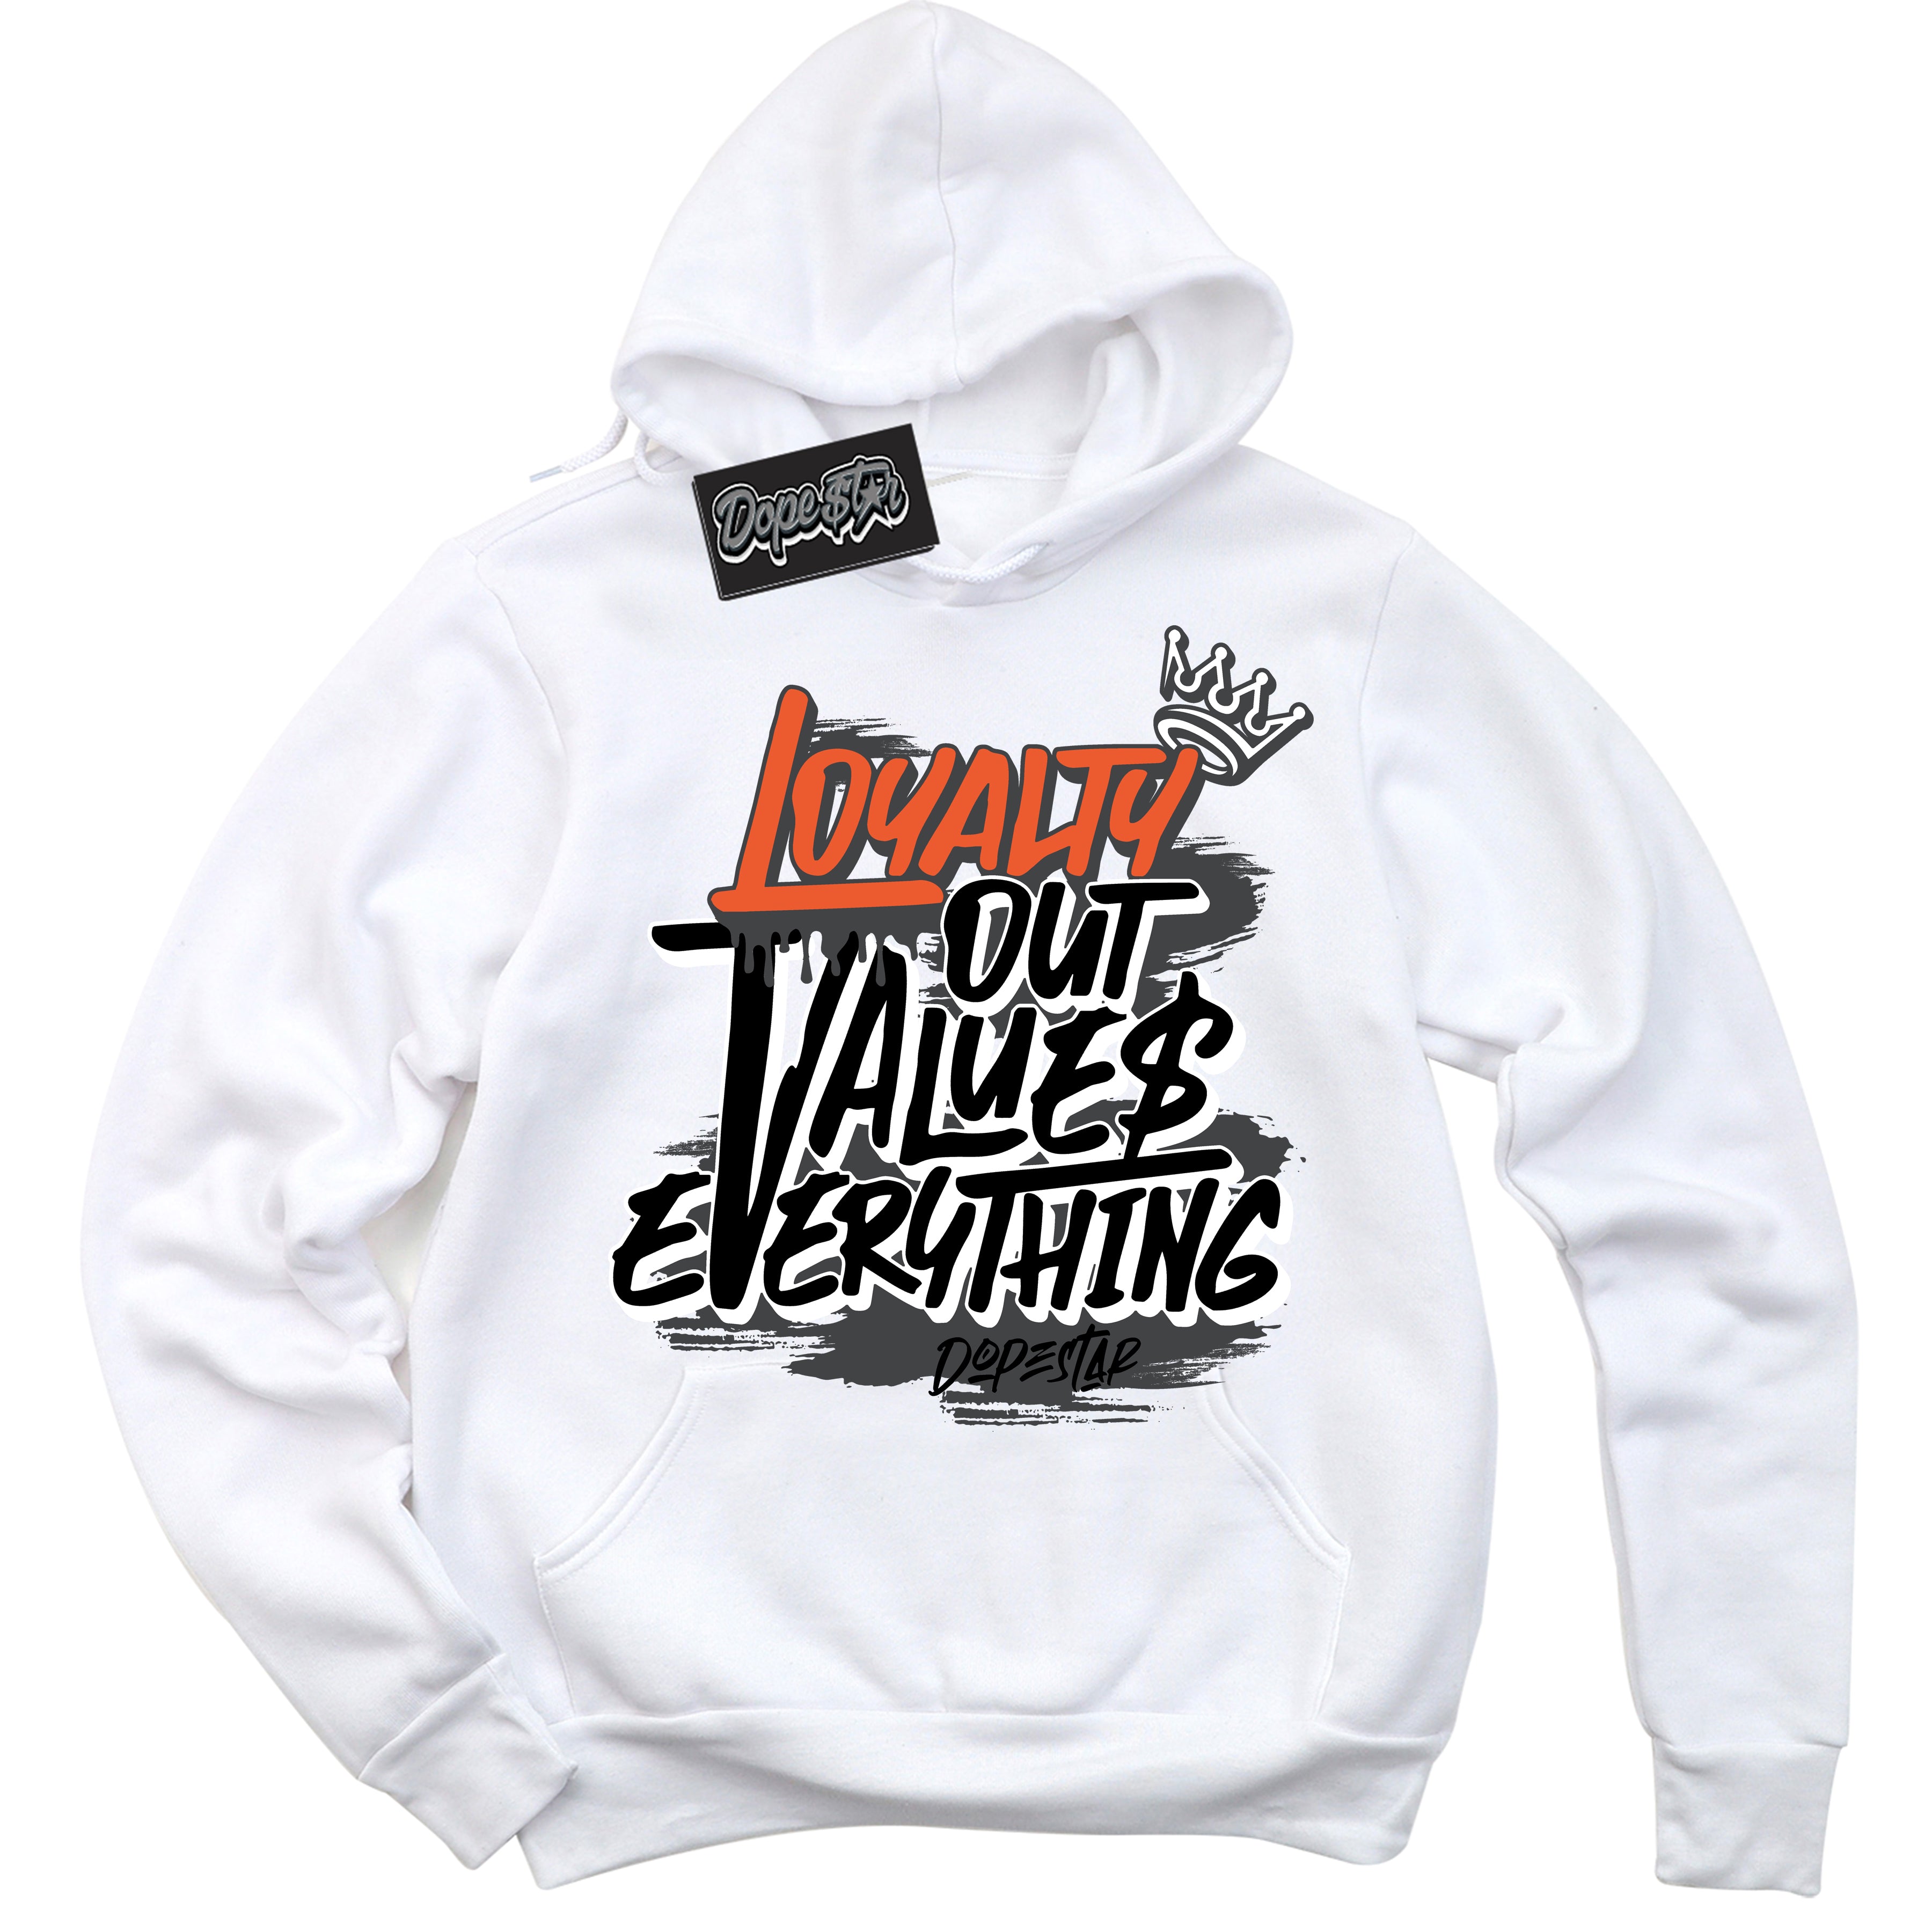 Cool White Hoodie with “ Loyalty Out Values Everything ”  design that Perfectly Matches Stash 1s Sneakers.